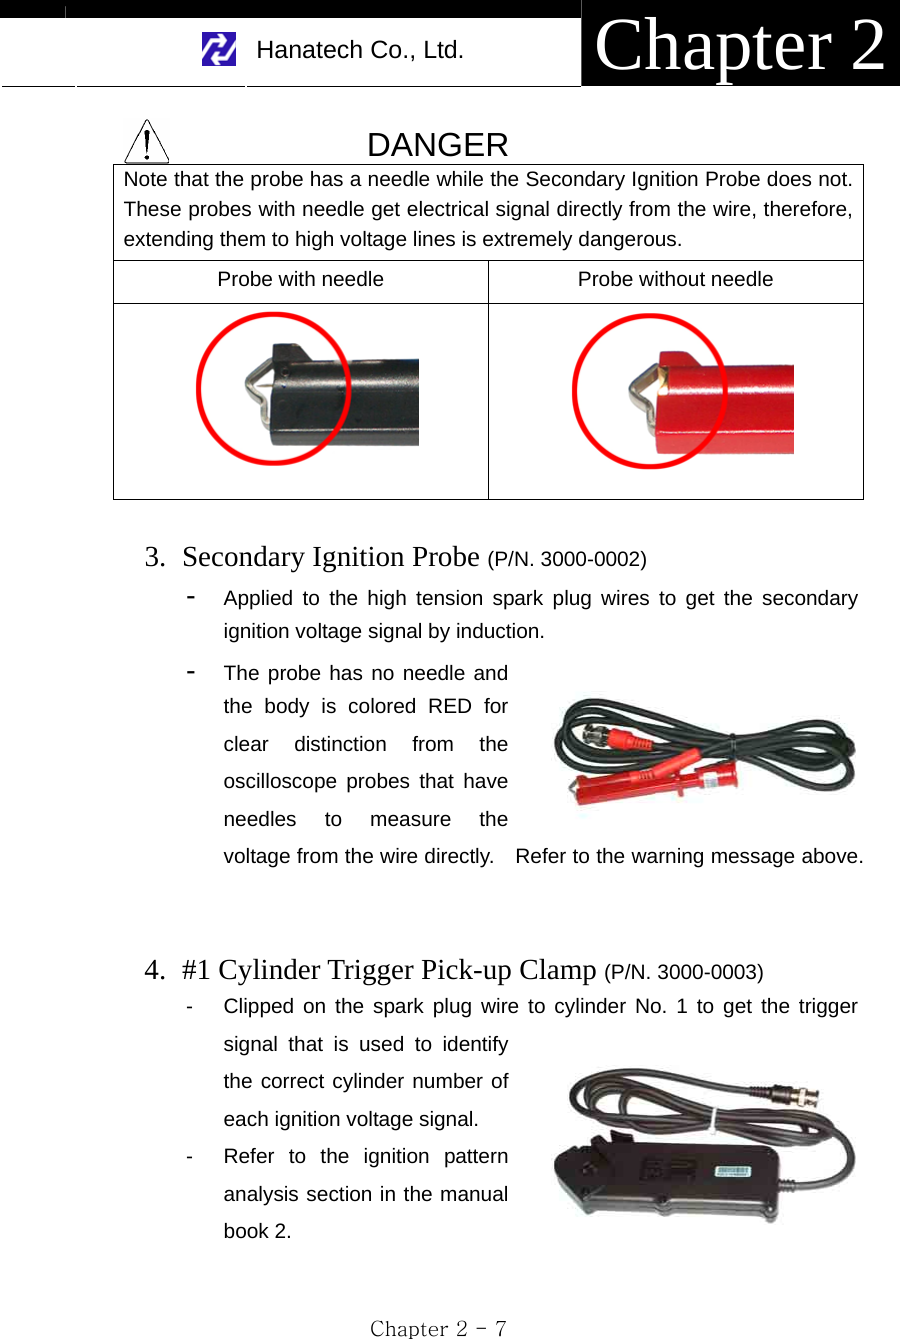     Hanatech Co., Ltd.  Chapter 2 Chapter 2 - 7  DANGER Note that the probe has a needle while the Secondary Ignition Probe does not. These probes with needle get electrical signal directly from the wire, therefore, extending them to high voltage lines is extremely dangerous. Probe with needle  Probe without needle    3. Secondary Ignition Probe (P/N. 3000-0002) -  Applied to the high tension spark plug wires to get the secondary ignition voltage signal by induction.   -  The probe has no needle and the body is colored RED for clear distinction from the oscilloscope probes that have needles to measure the voltage from the wire directly.    Refer to the warning message above.   4. #1 Cylinder Trigger Pick-up Clamp (P/N. 3000-0003) -  Clipped on the spark plug wire to cylinder No. 1 to get the trigger signal that is used to identify the correct cylinder number of each ignition voltage signal.   -  Refer to the ignition pattern analysis section in the manual book 2.  